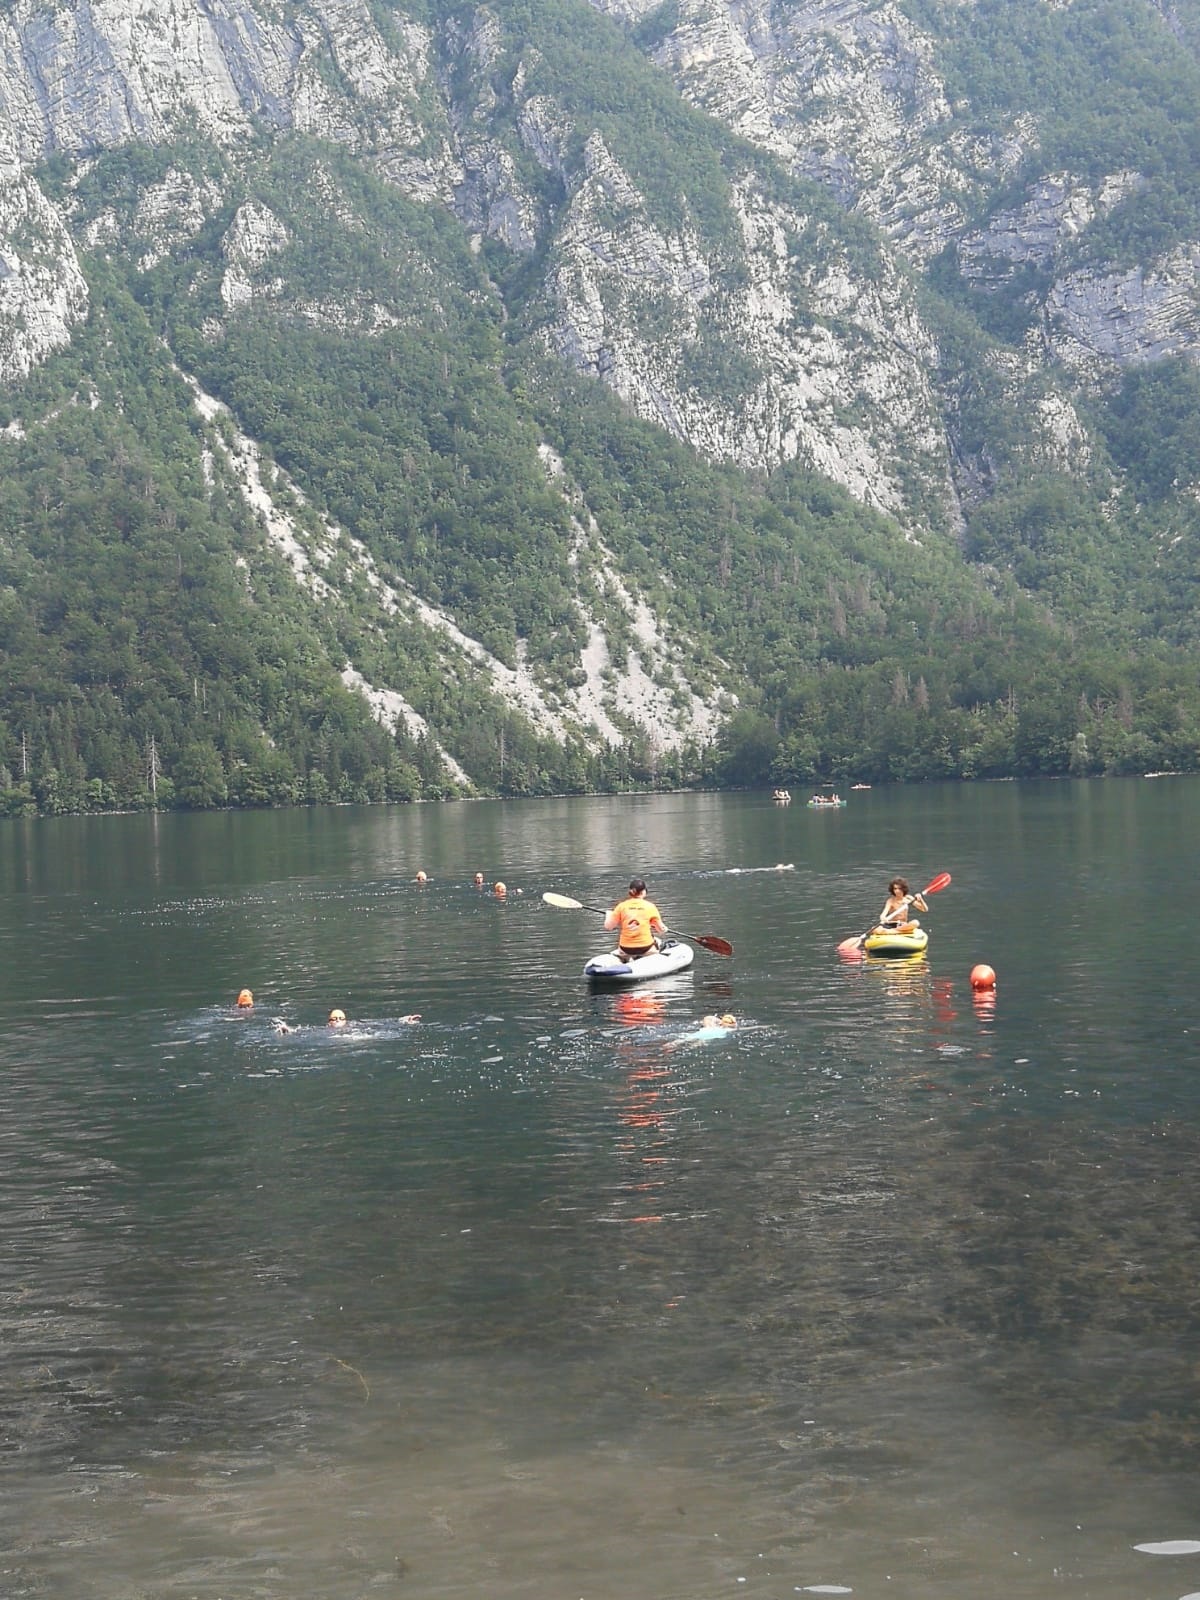 two kayakers with a few swimmers in a lake with a mountain